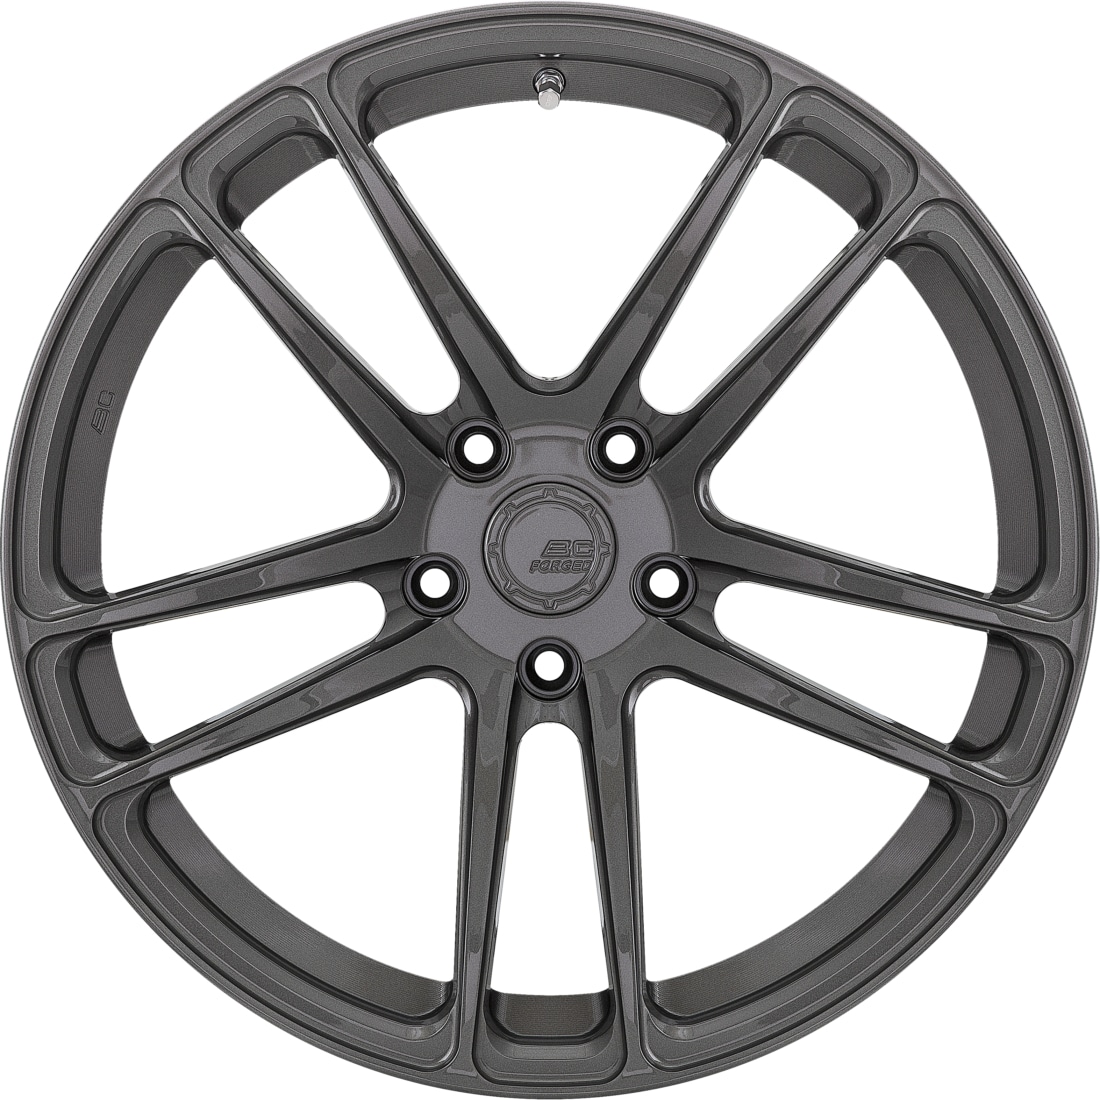 2020-23 BC Forged RZ01 Wheels for C8 Corvette, Set of 4